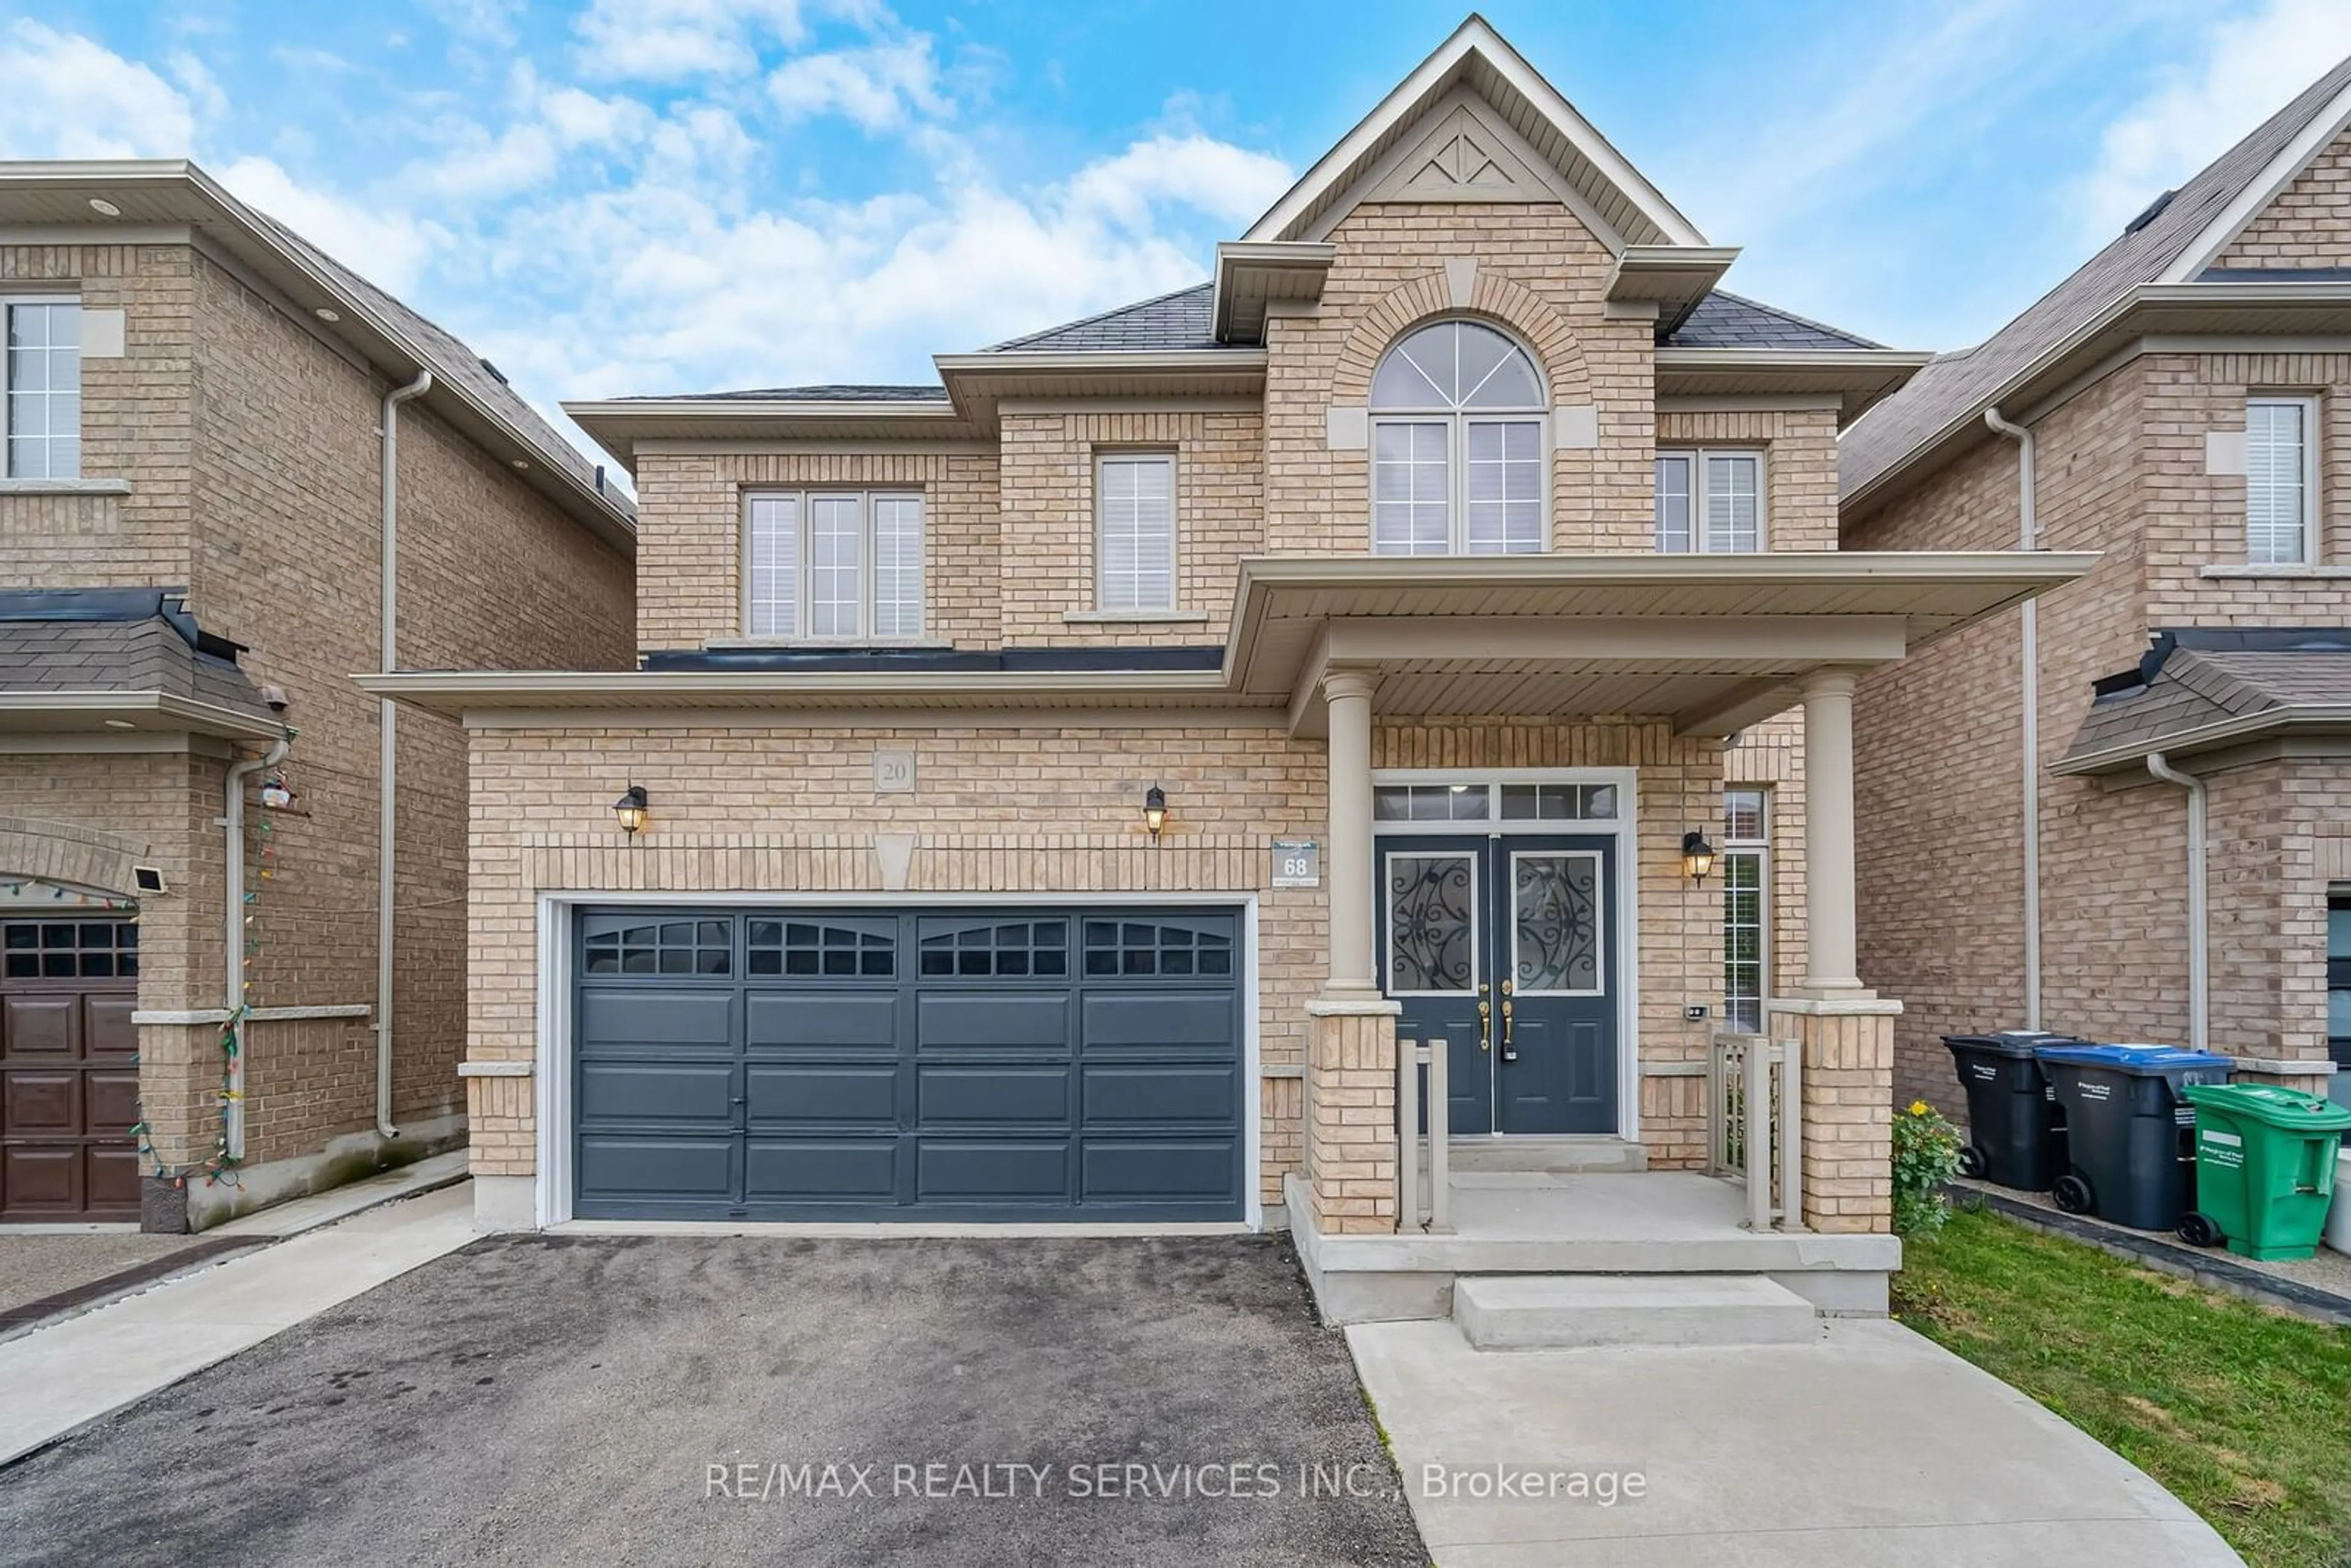 Home with brick exterior material for 20 Vontress St, Brampton Ontario L6R 3S4